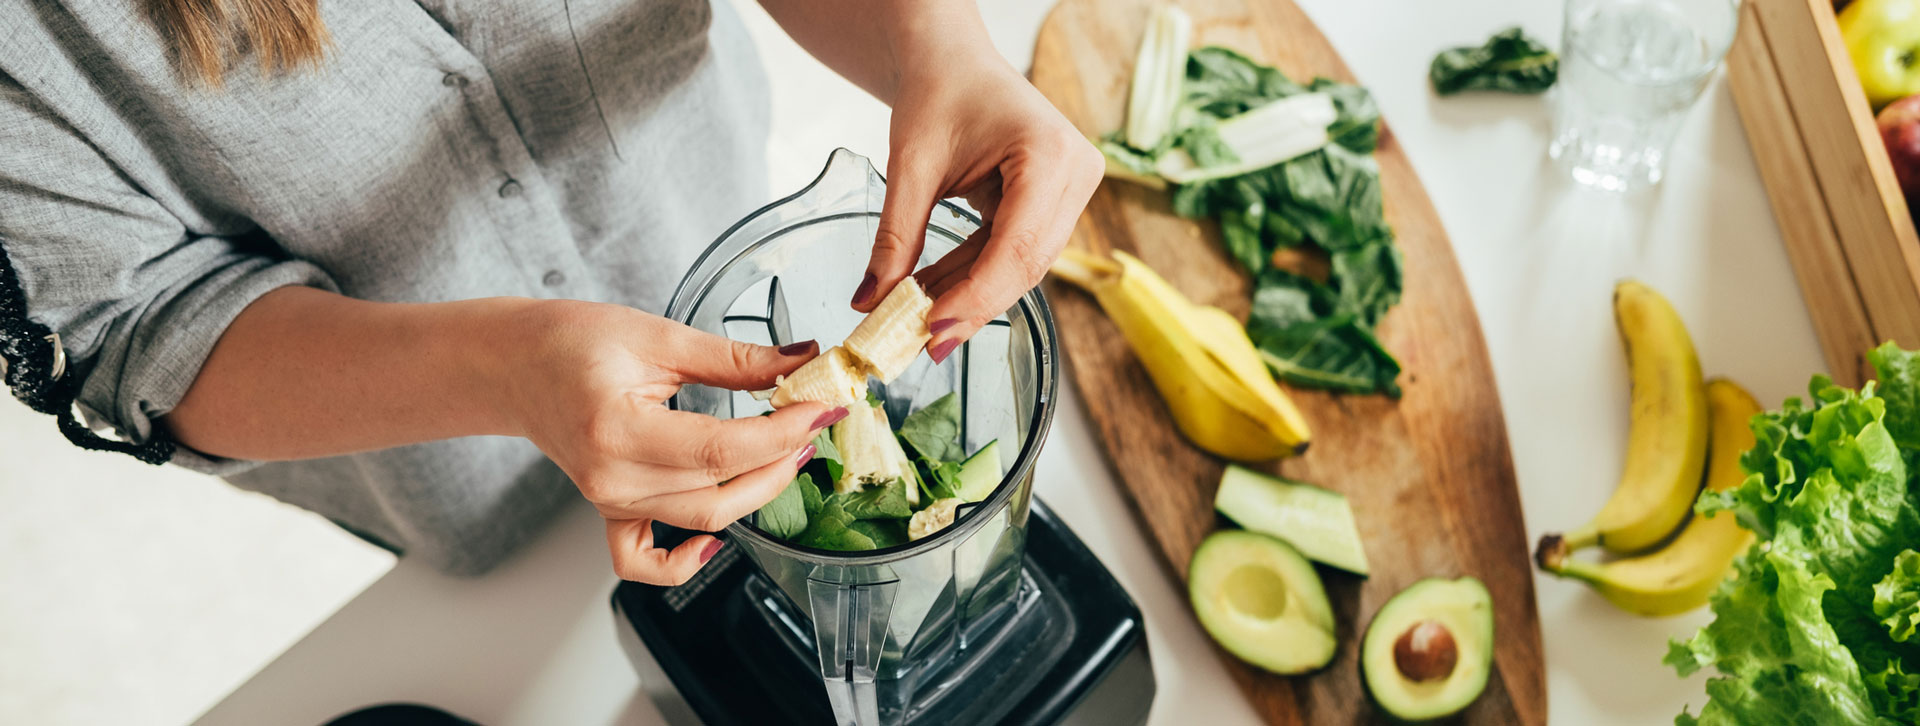 Woman is preparing a green smoothie with fresh fruits, green spinach and avocado.